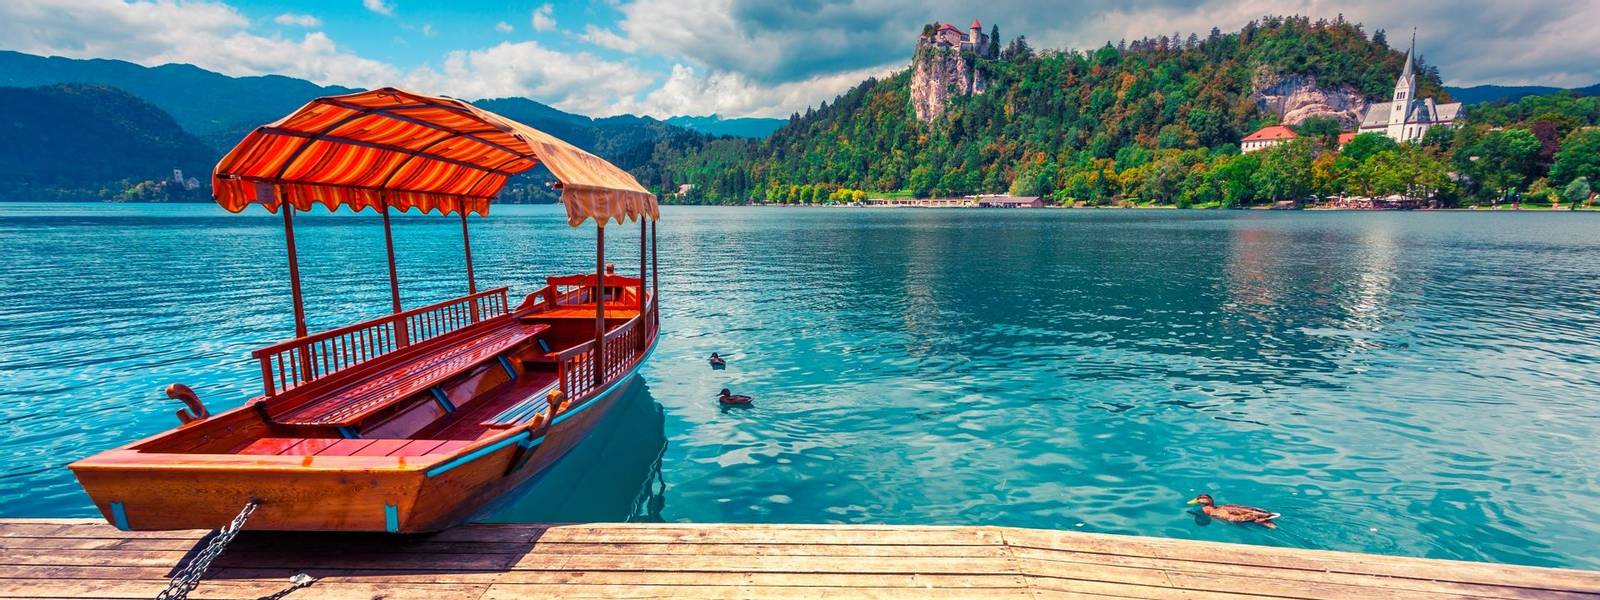 Lake Bled is a glacial lake in the Julian Alps 